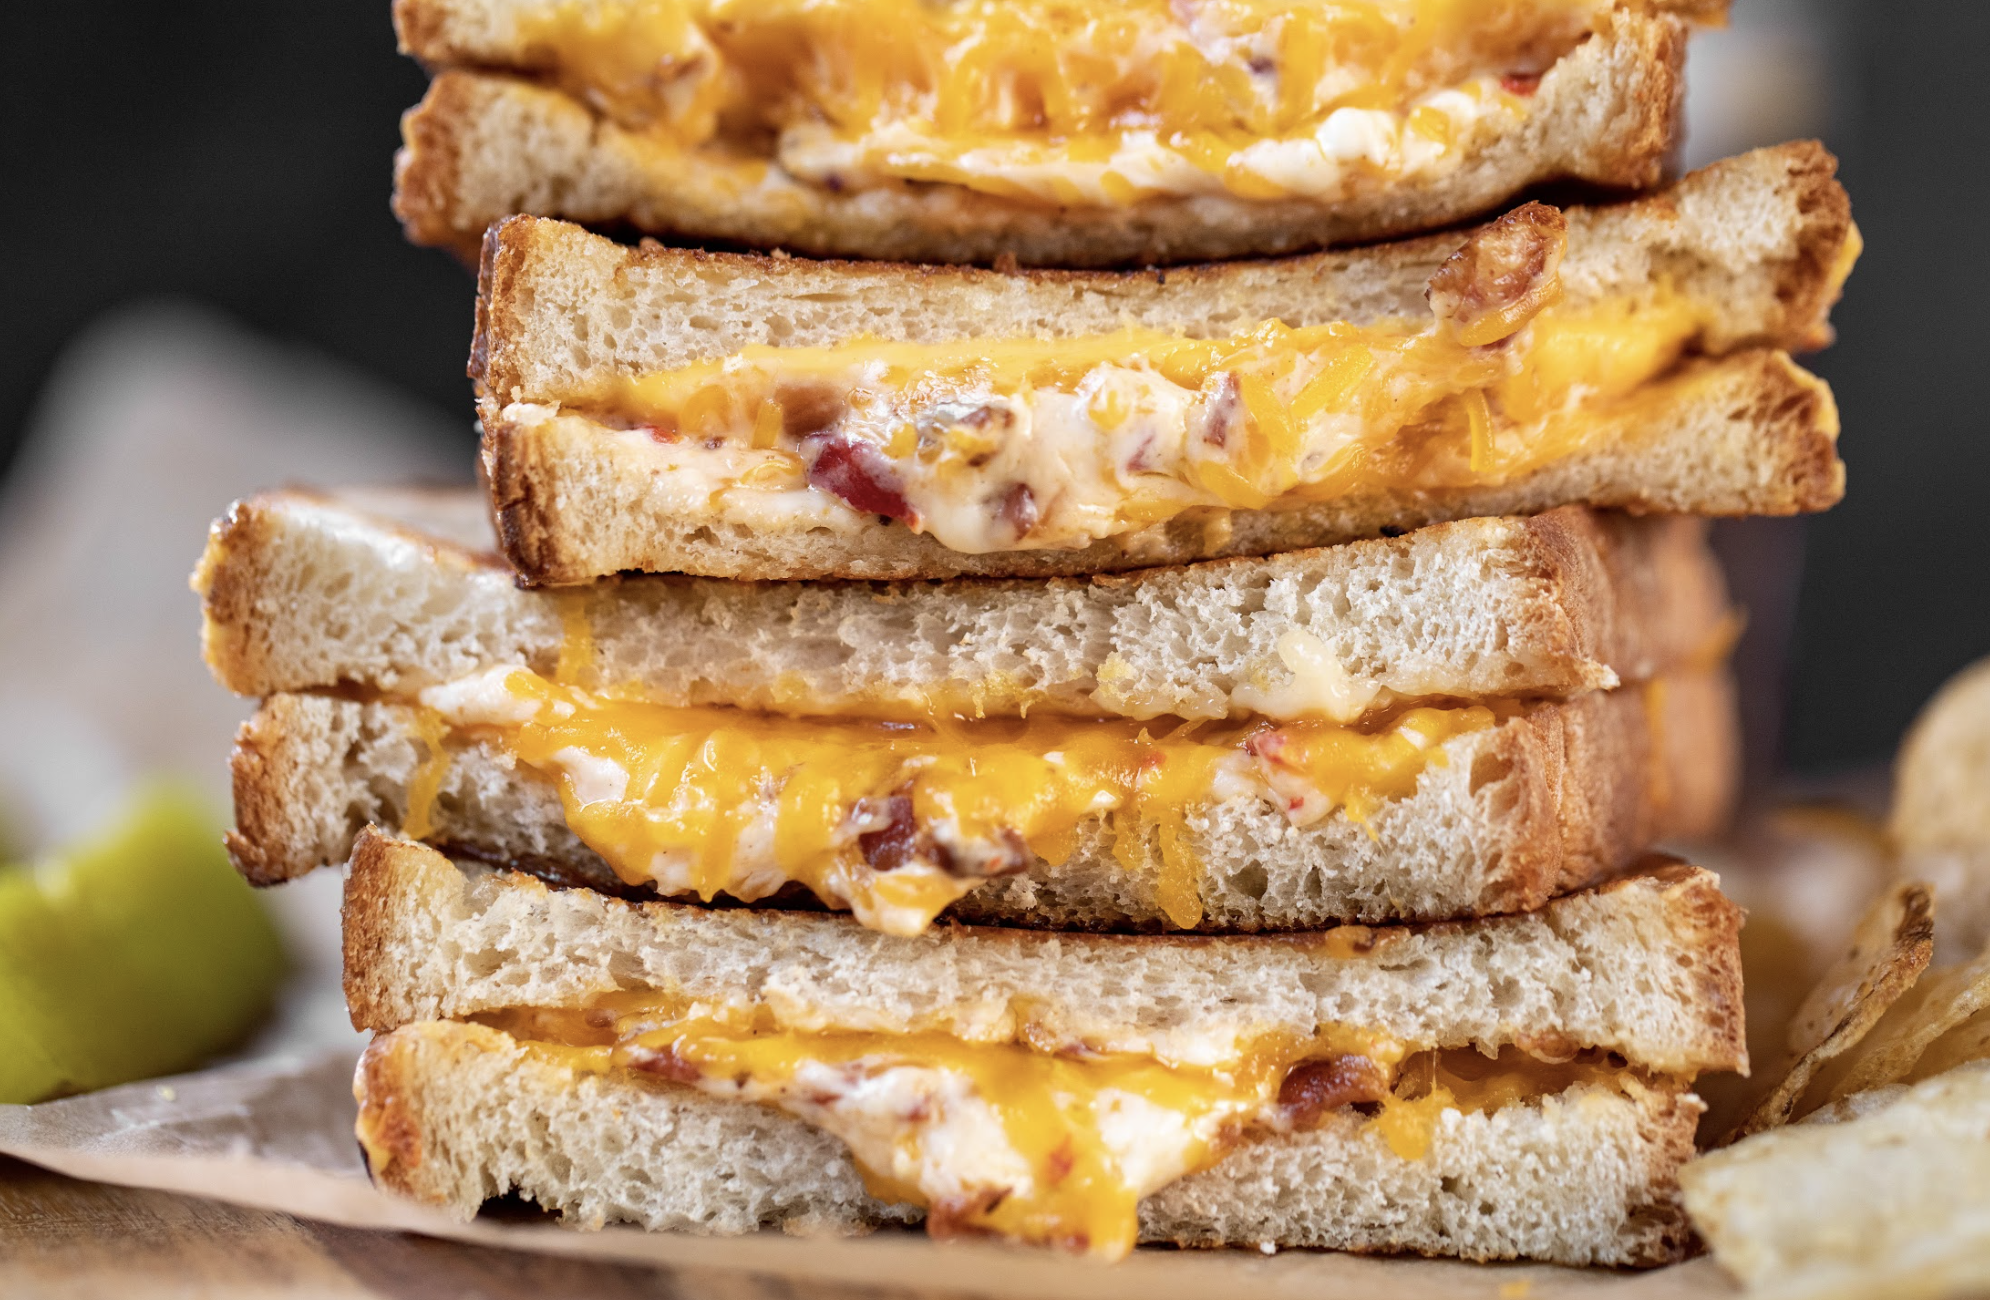 Bacon & Pimento Cheese Grilled Cheese